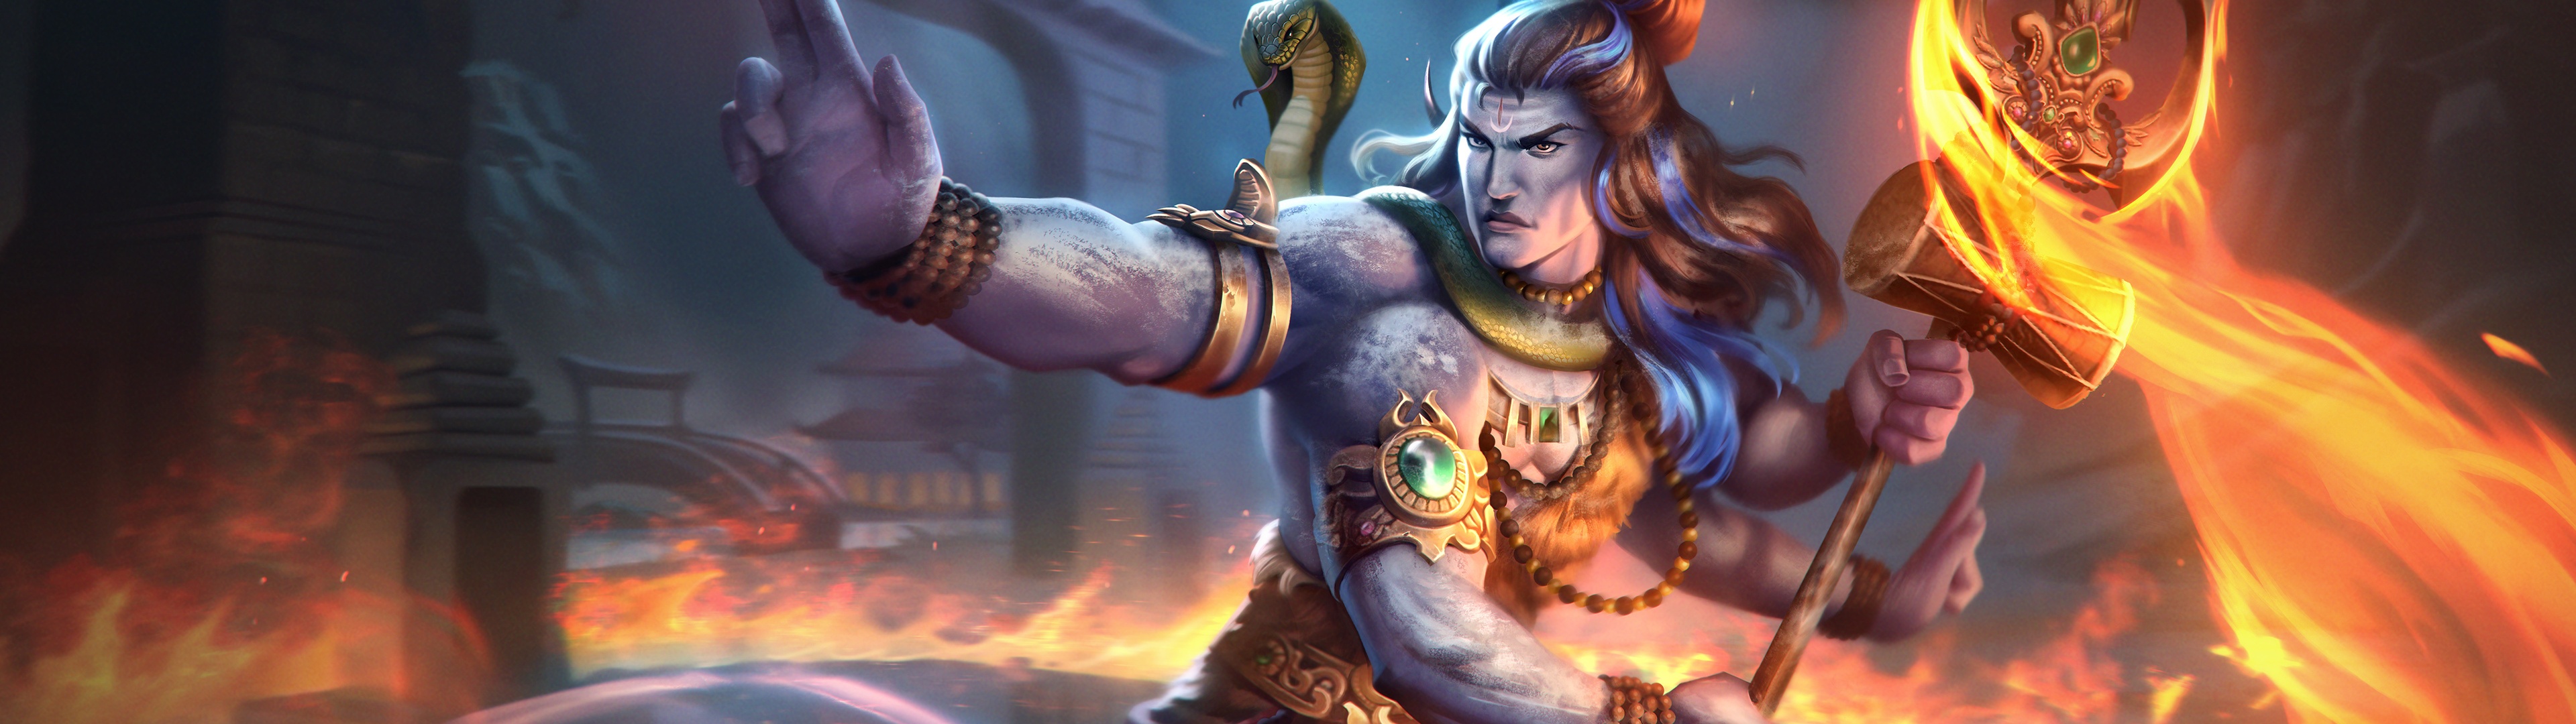 LORD SHIVA IMAGES HD1080p Wallpaper Download September 15, 2023